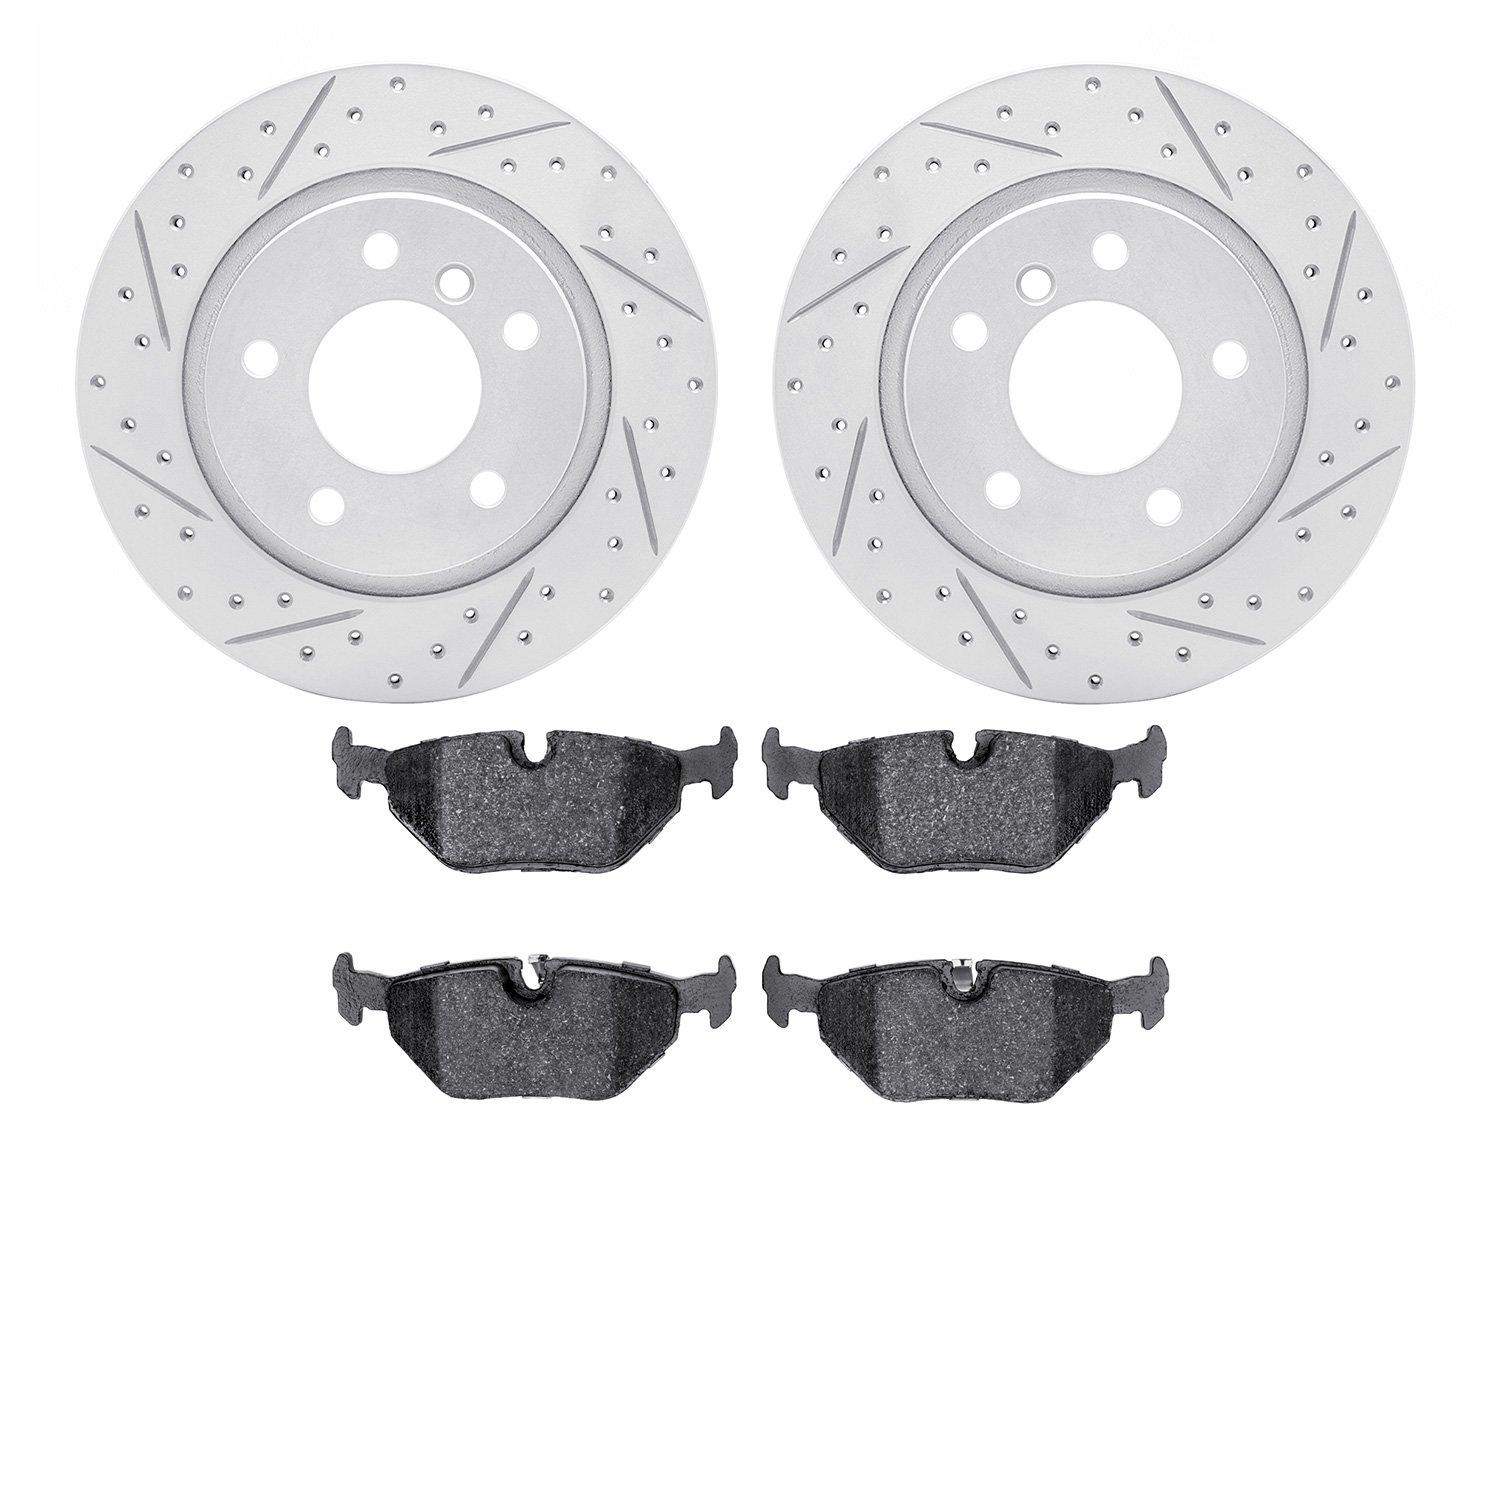 2502-31039 Geoperformance Drilled/Slotted Rotors w/5000 Advanced Brake Pads Kit, 2003-2008 BMW, Position: Rear